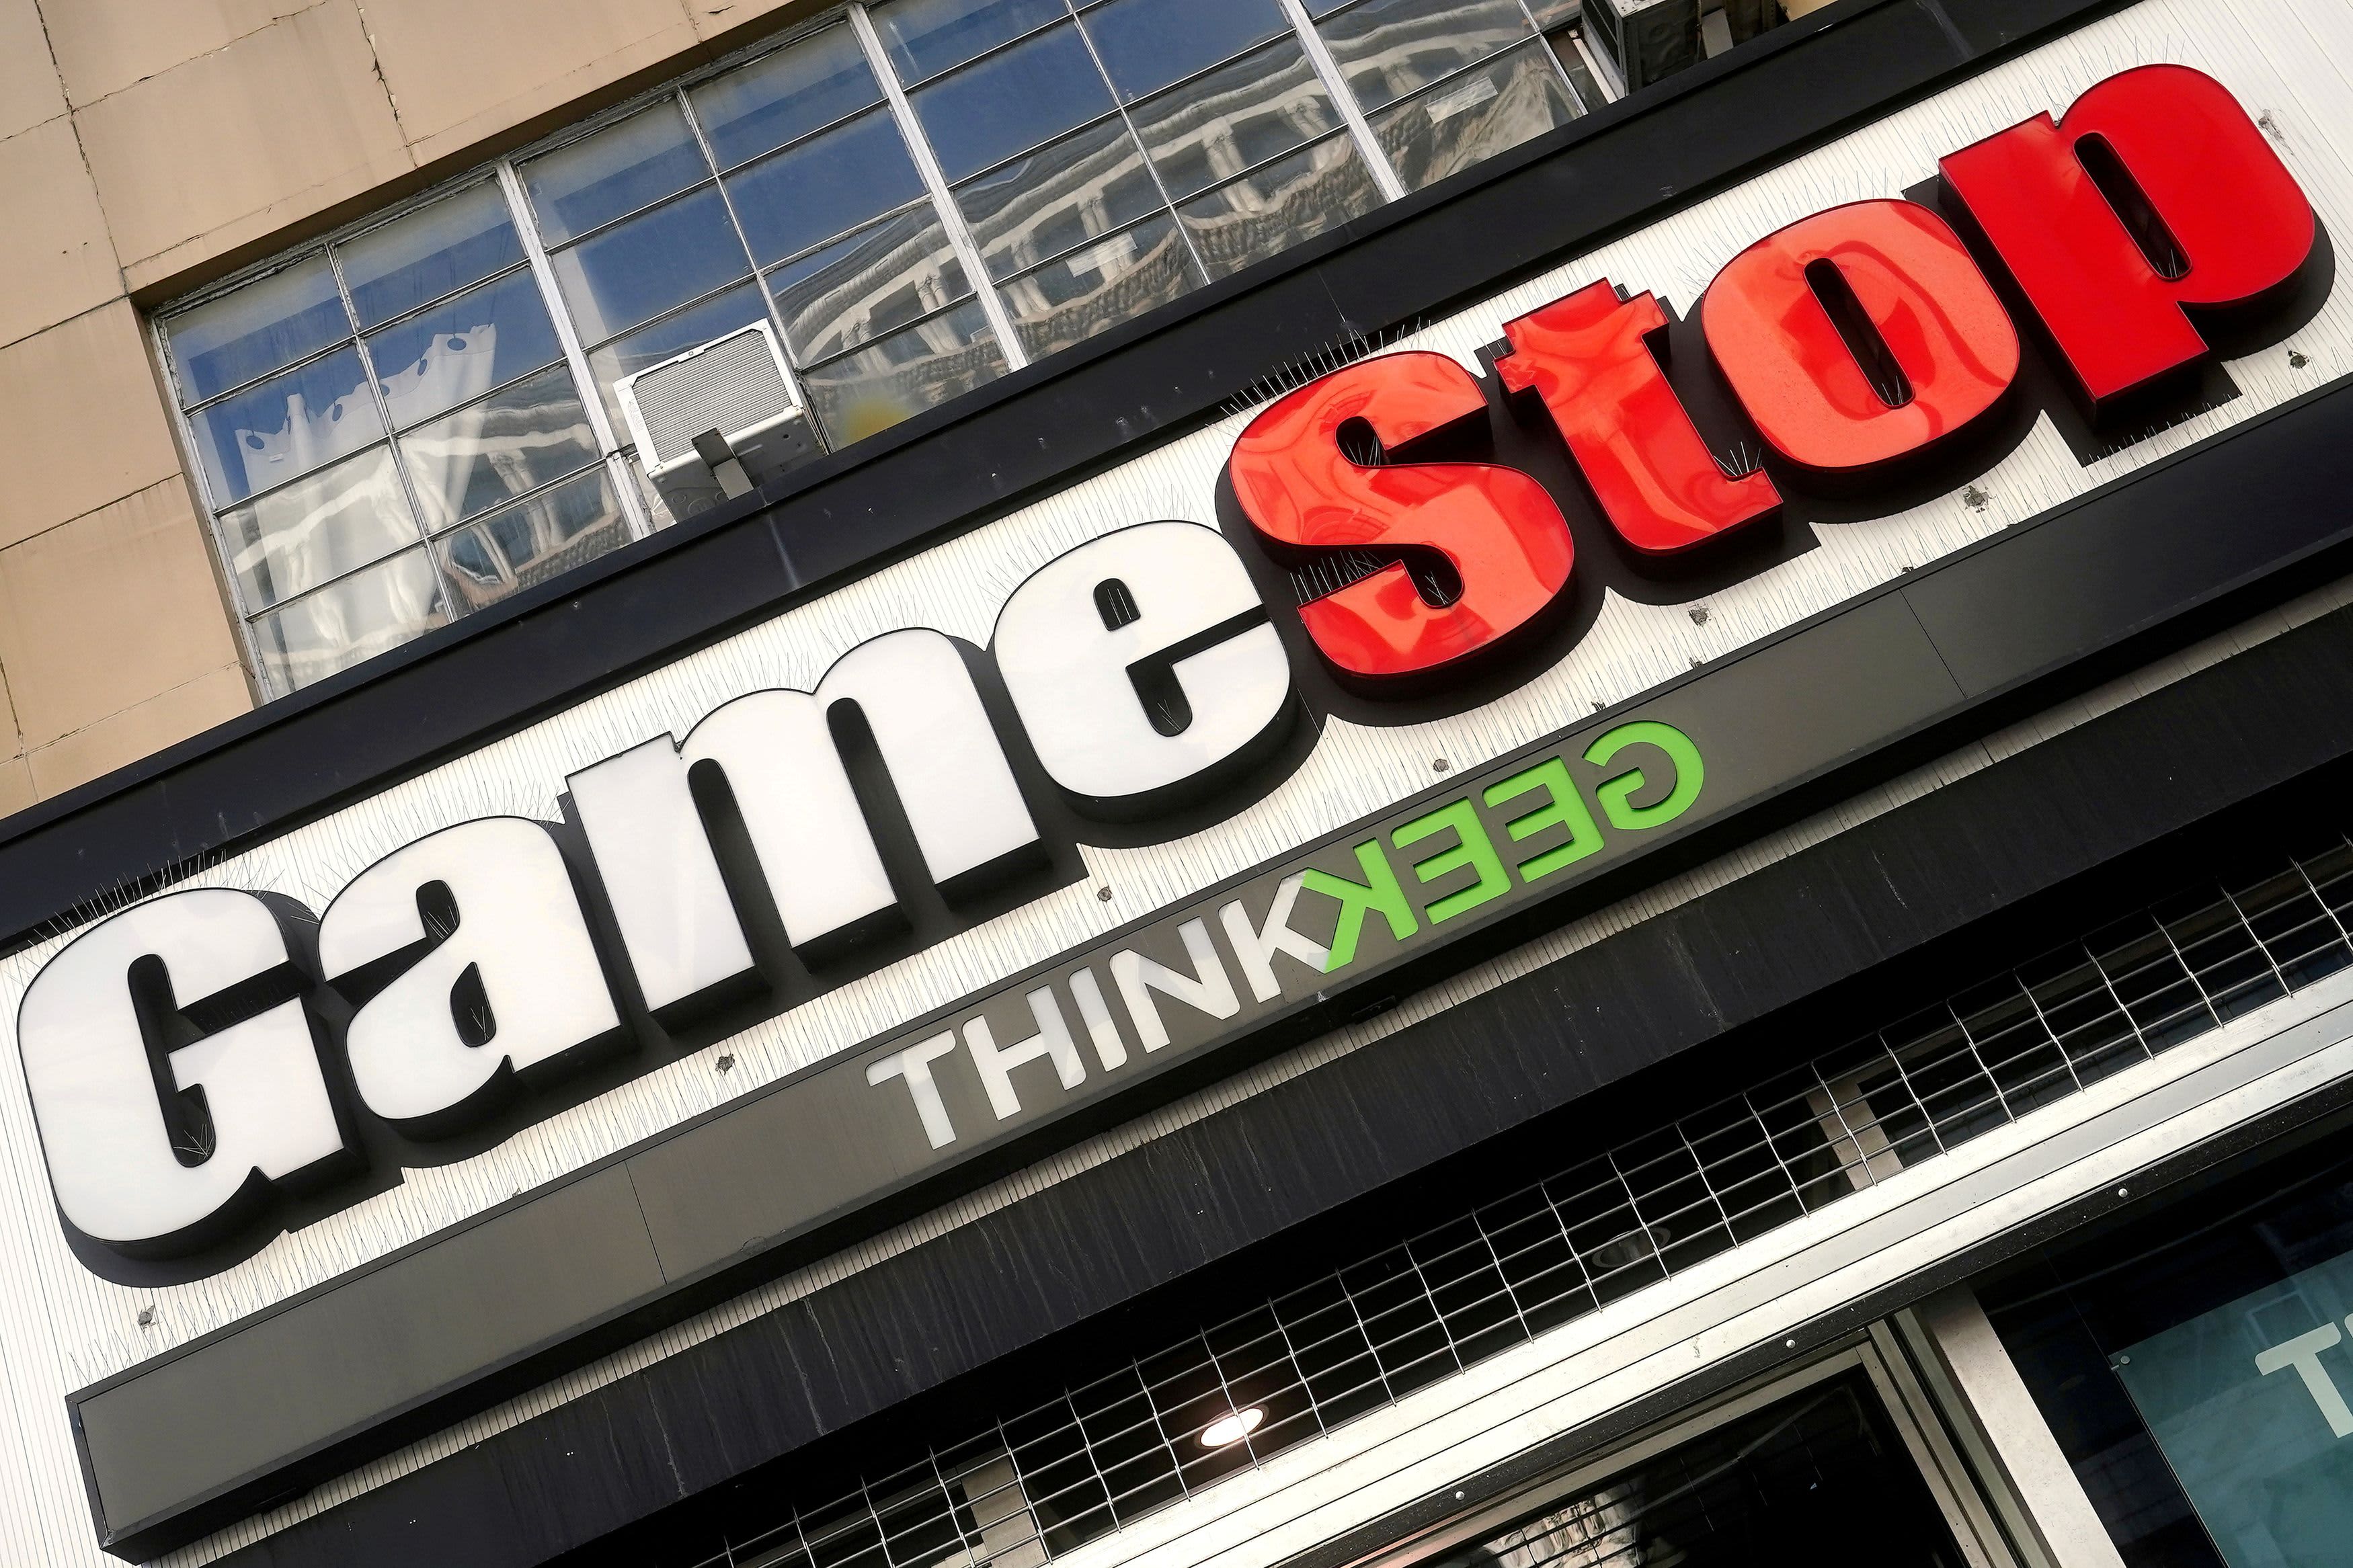 GameStop’s shares rise more than 90% in late afternoon trading